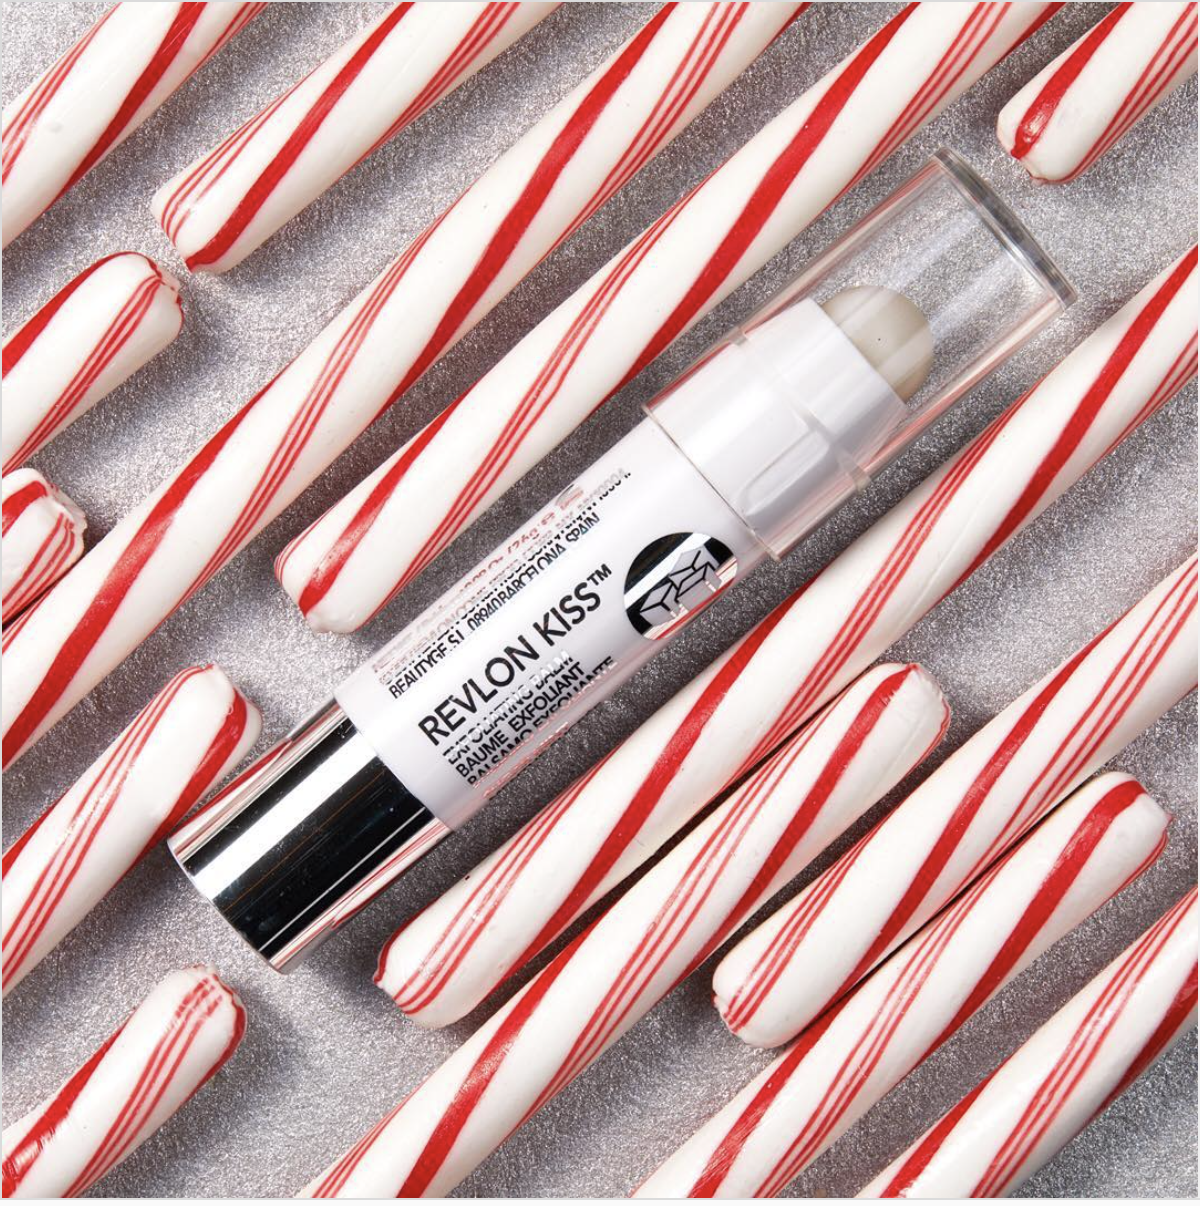 The lip scrub laying amidst many candy canes